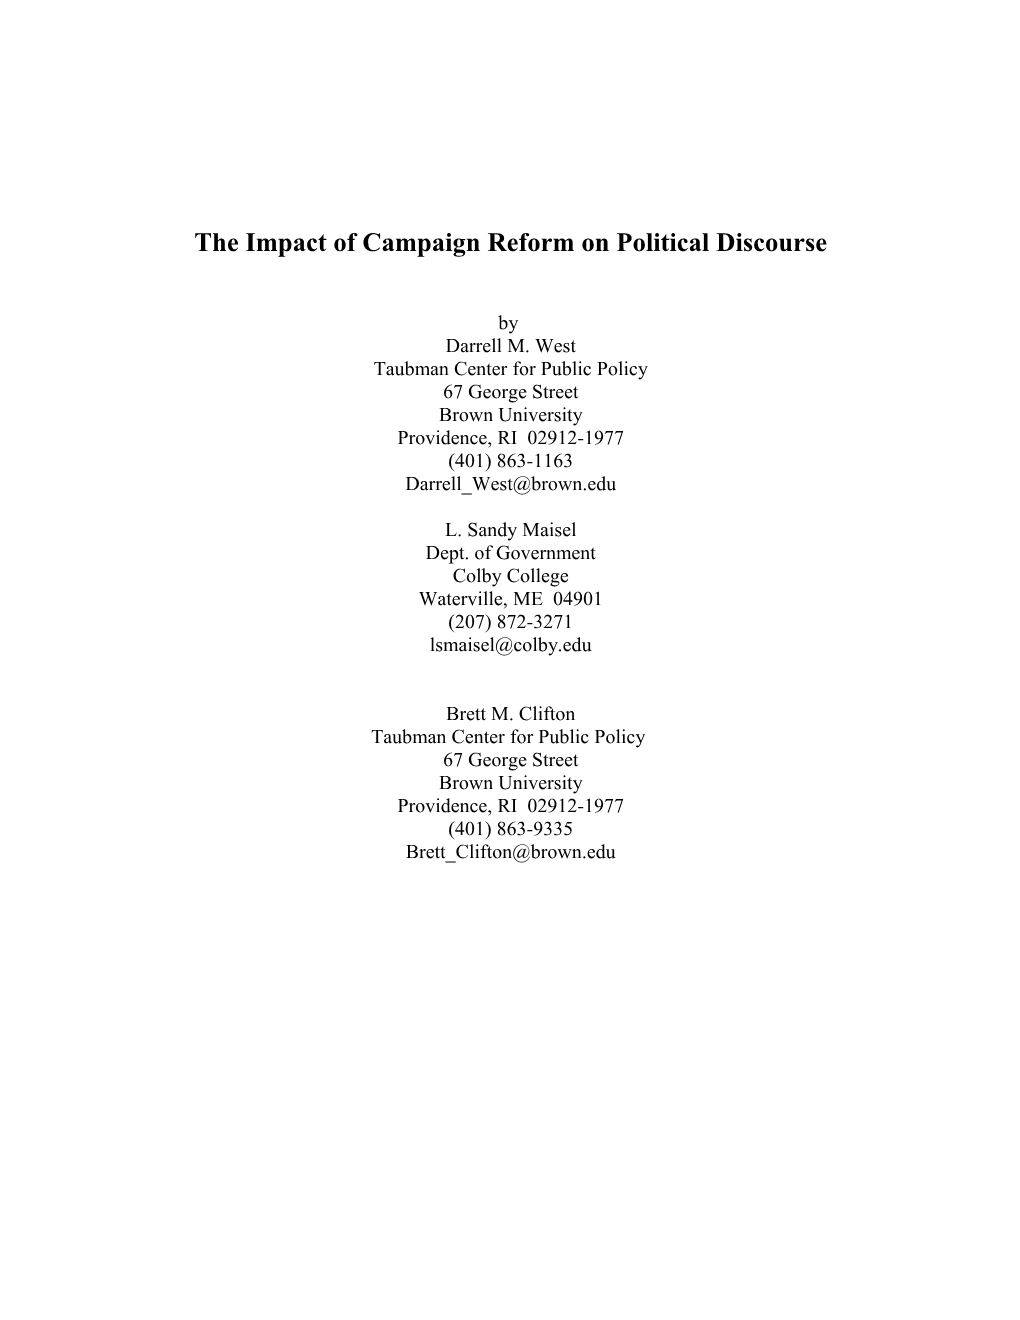 Campaign Reform and Discourse